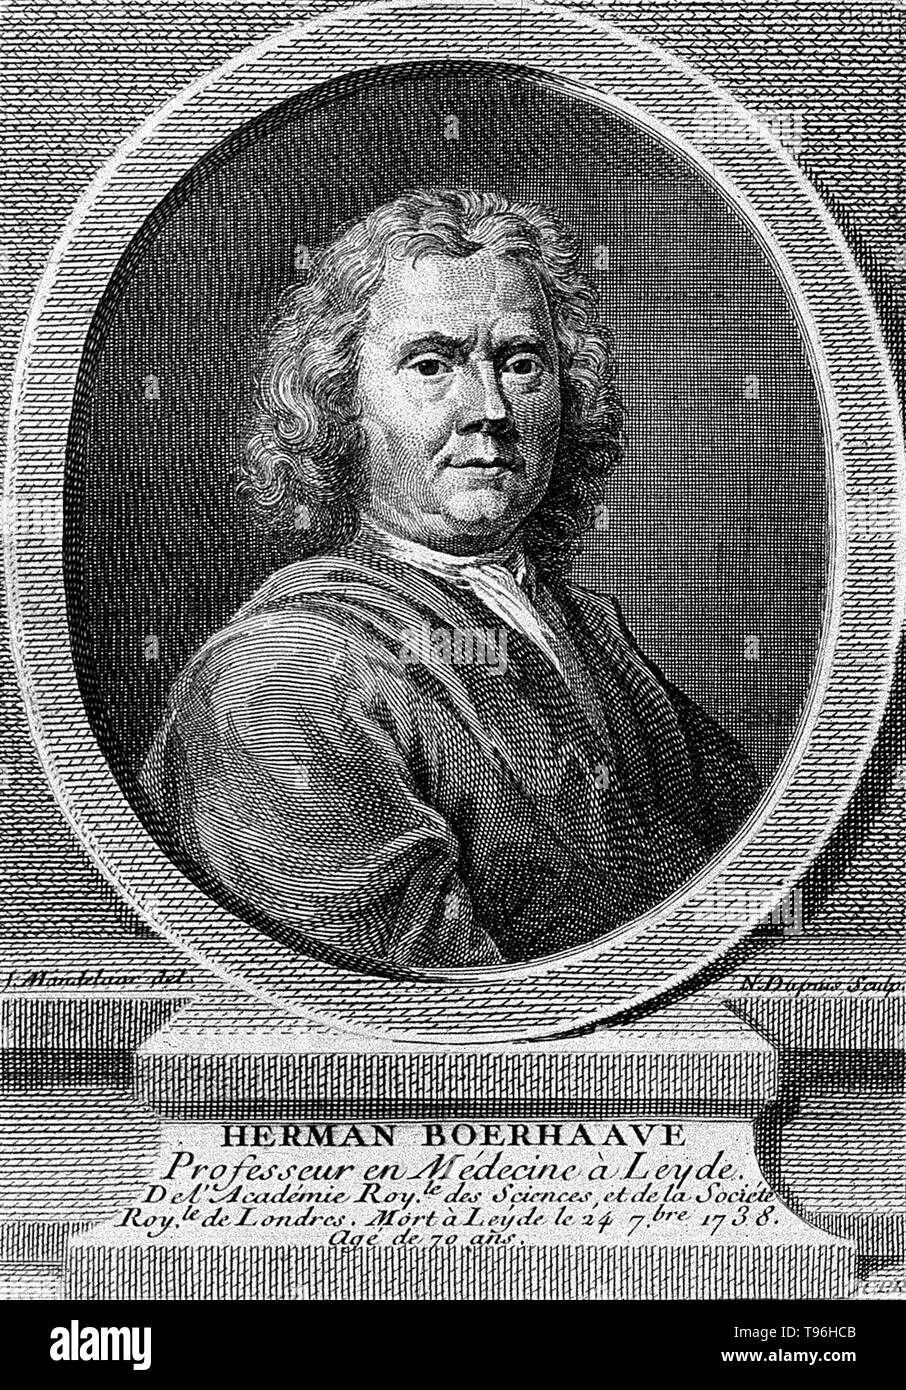 Herman Boerhaave (December 31, 1668 - September 23, 1738) was a Dutch botanist, chemist, humanist and physician, regarded as the founder of clinical teaching and of the modern academic hospital. All the princes of Europe sent him pupils, who found in this skillful professor not only an indefatigable teacher, but an affectionate guardian. In 1714, when he was appointed rector of the university and in this capacity introduced the modern system of clinical instruction. Stock Photo